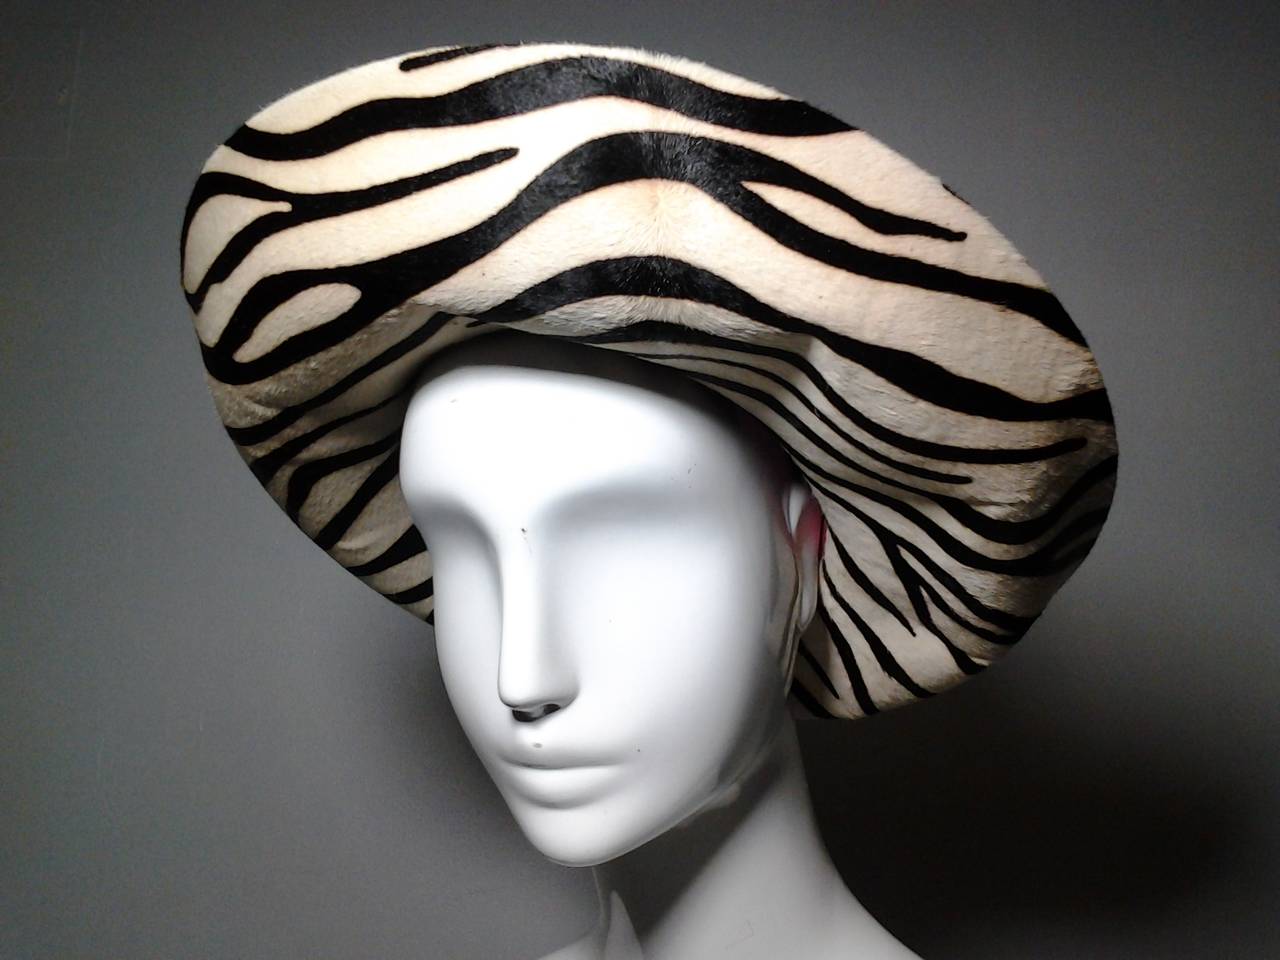 1960s Frank Olive zebra skin curved brim hat.  So smart and chic! 

Combs attached for securing to hairstyle.

Inner band measures 21